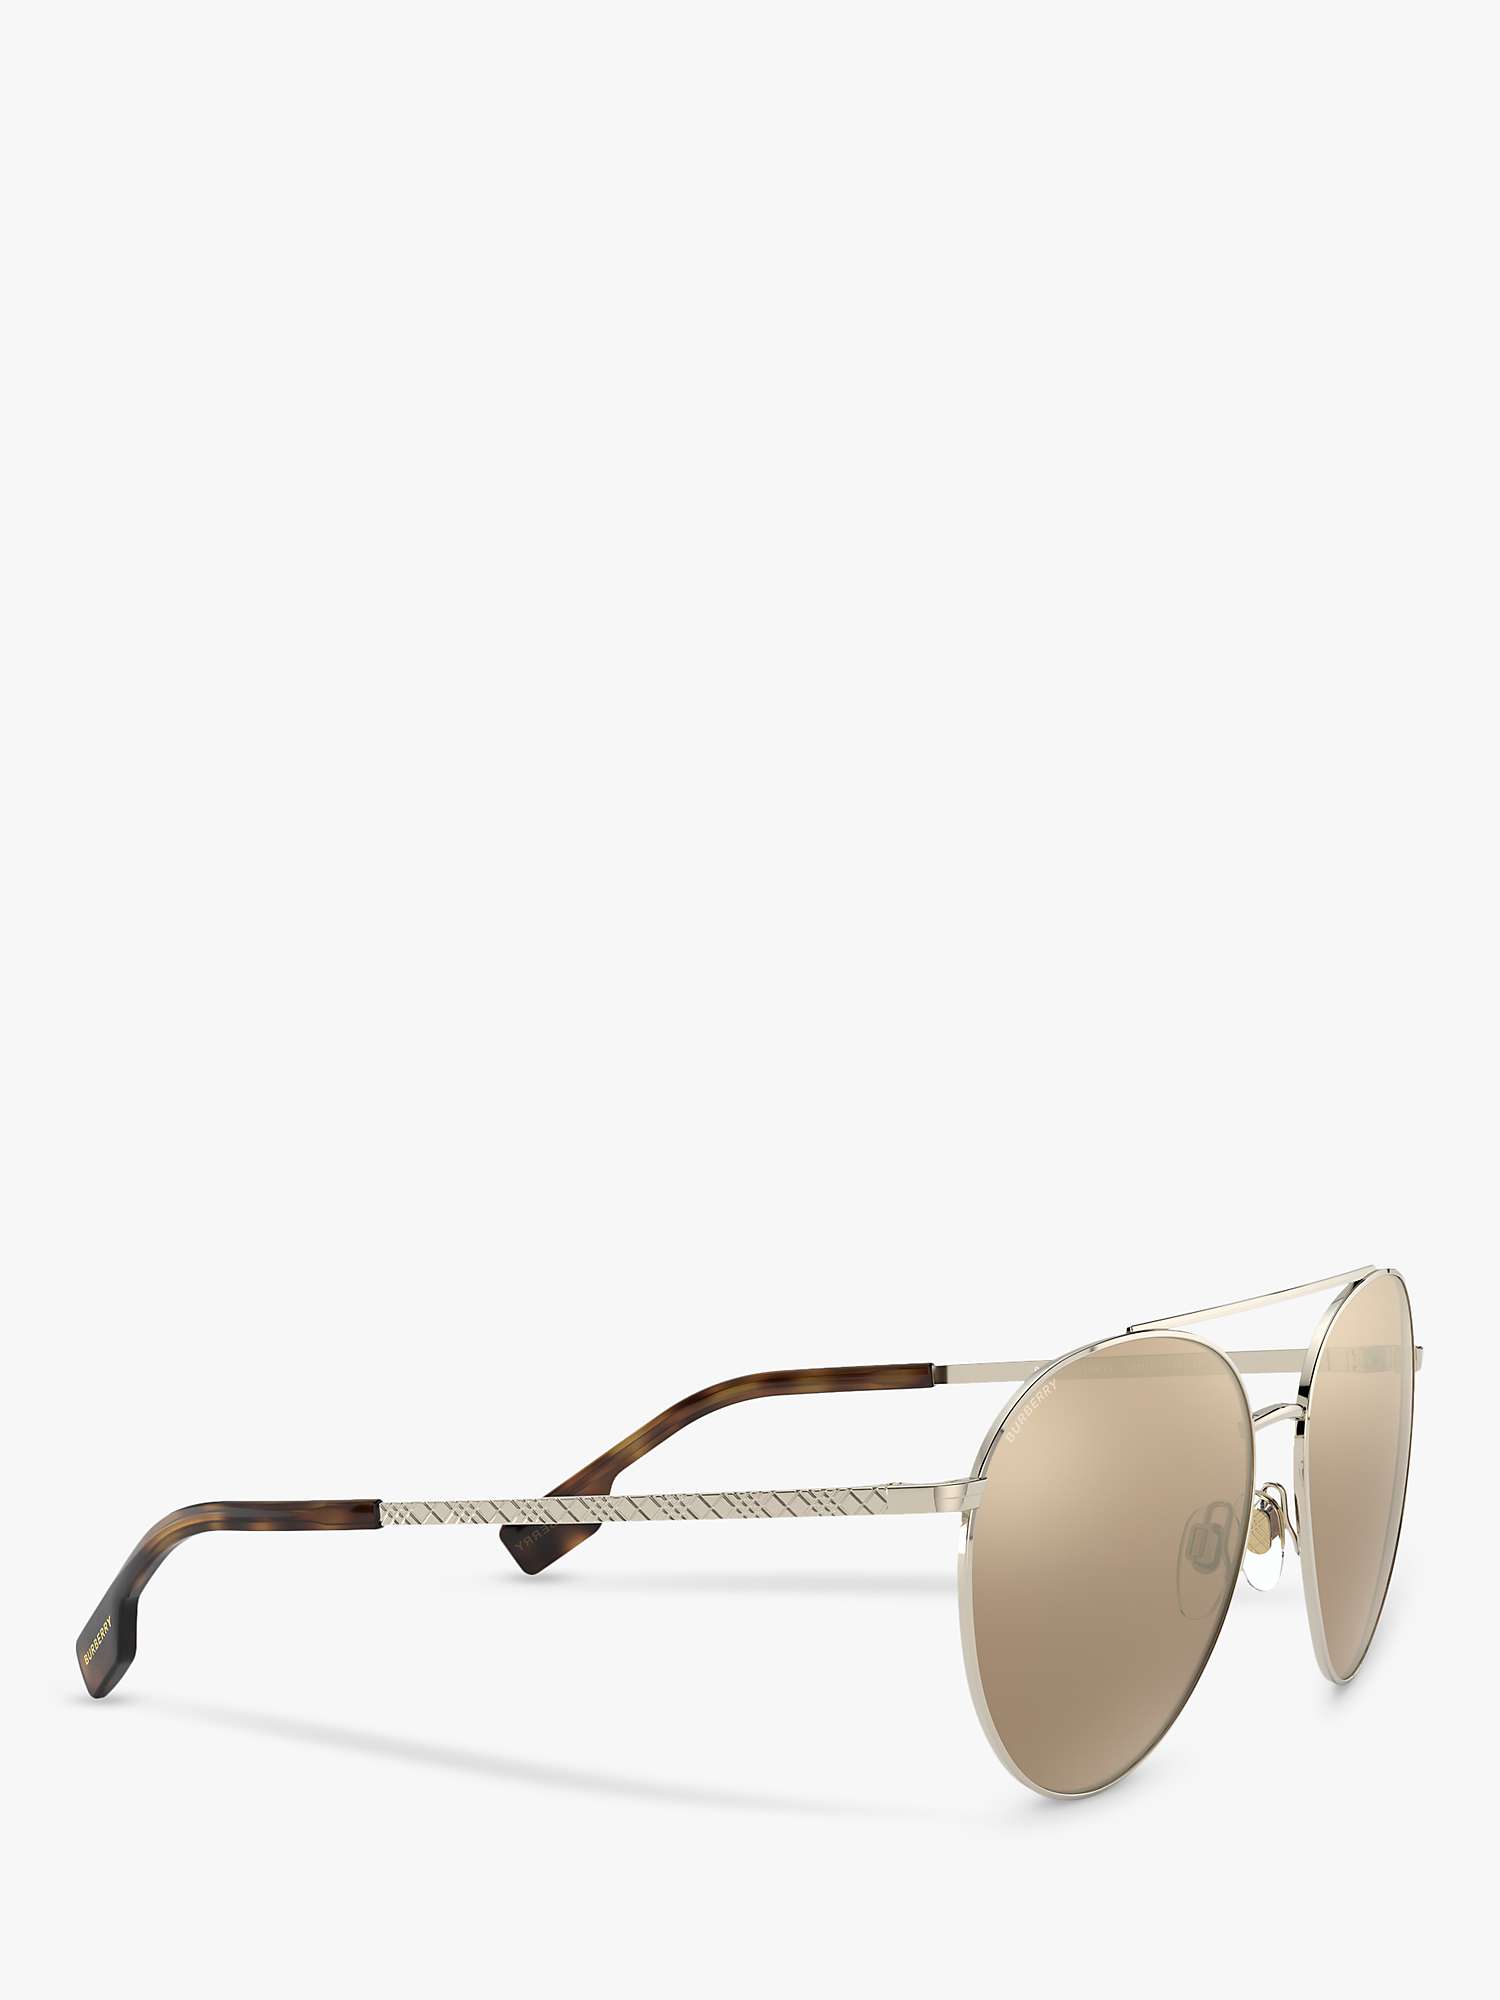 Burberry Be3115 Women S Polarised Aviator Sunglasses Pale Gold Mirror Brown At John Lewis Partners